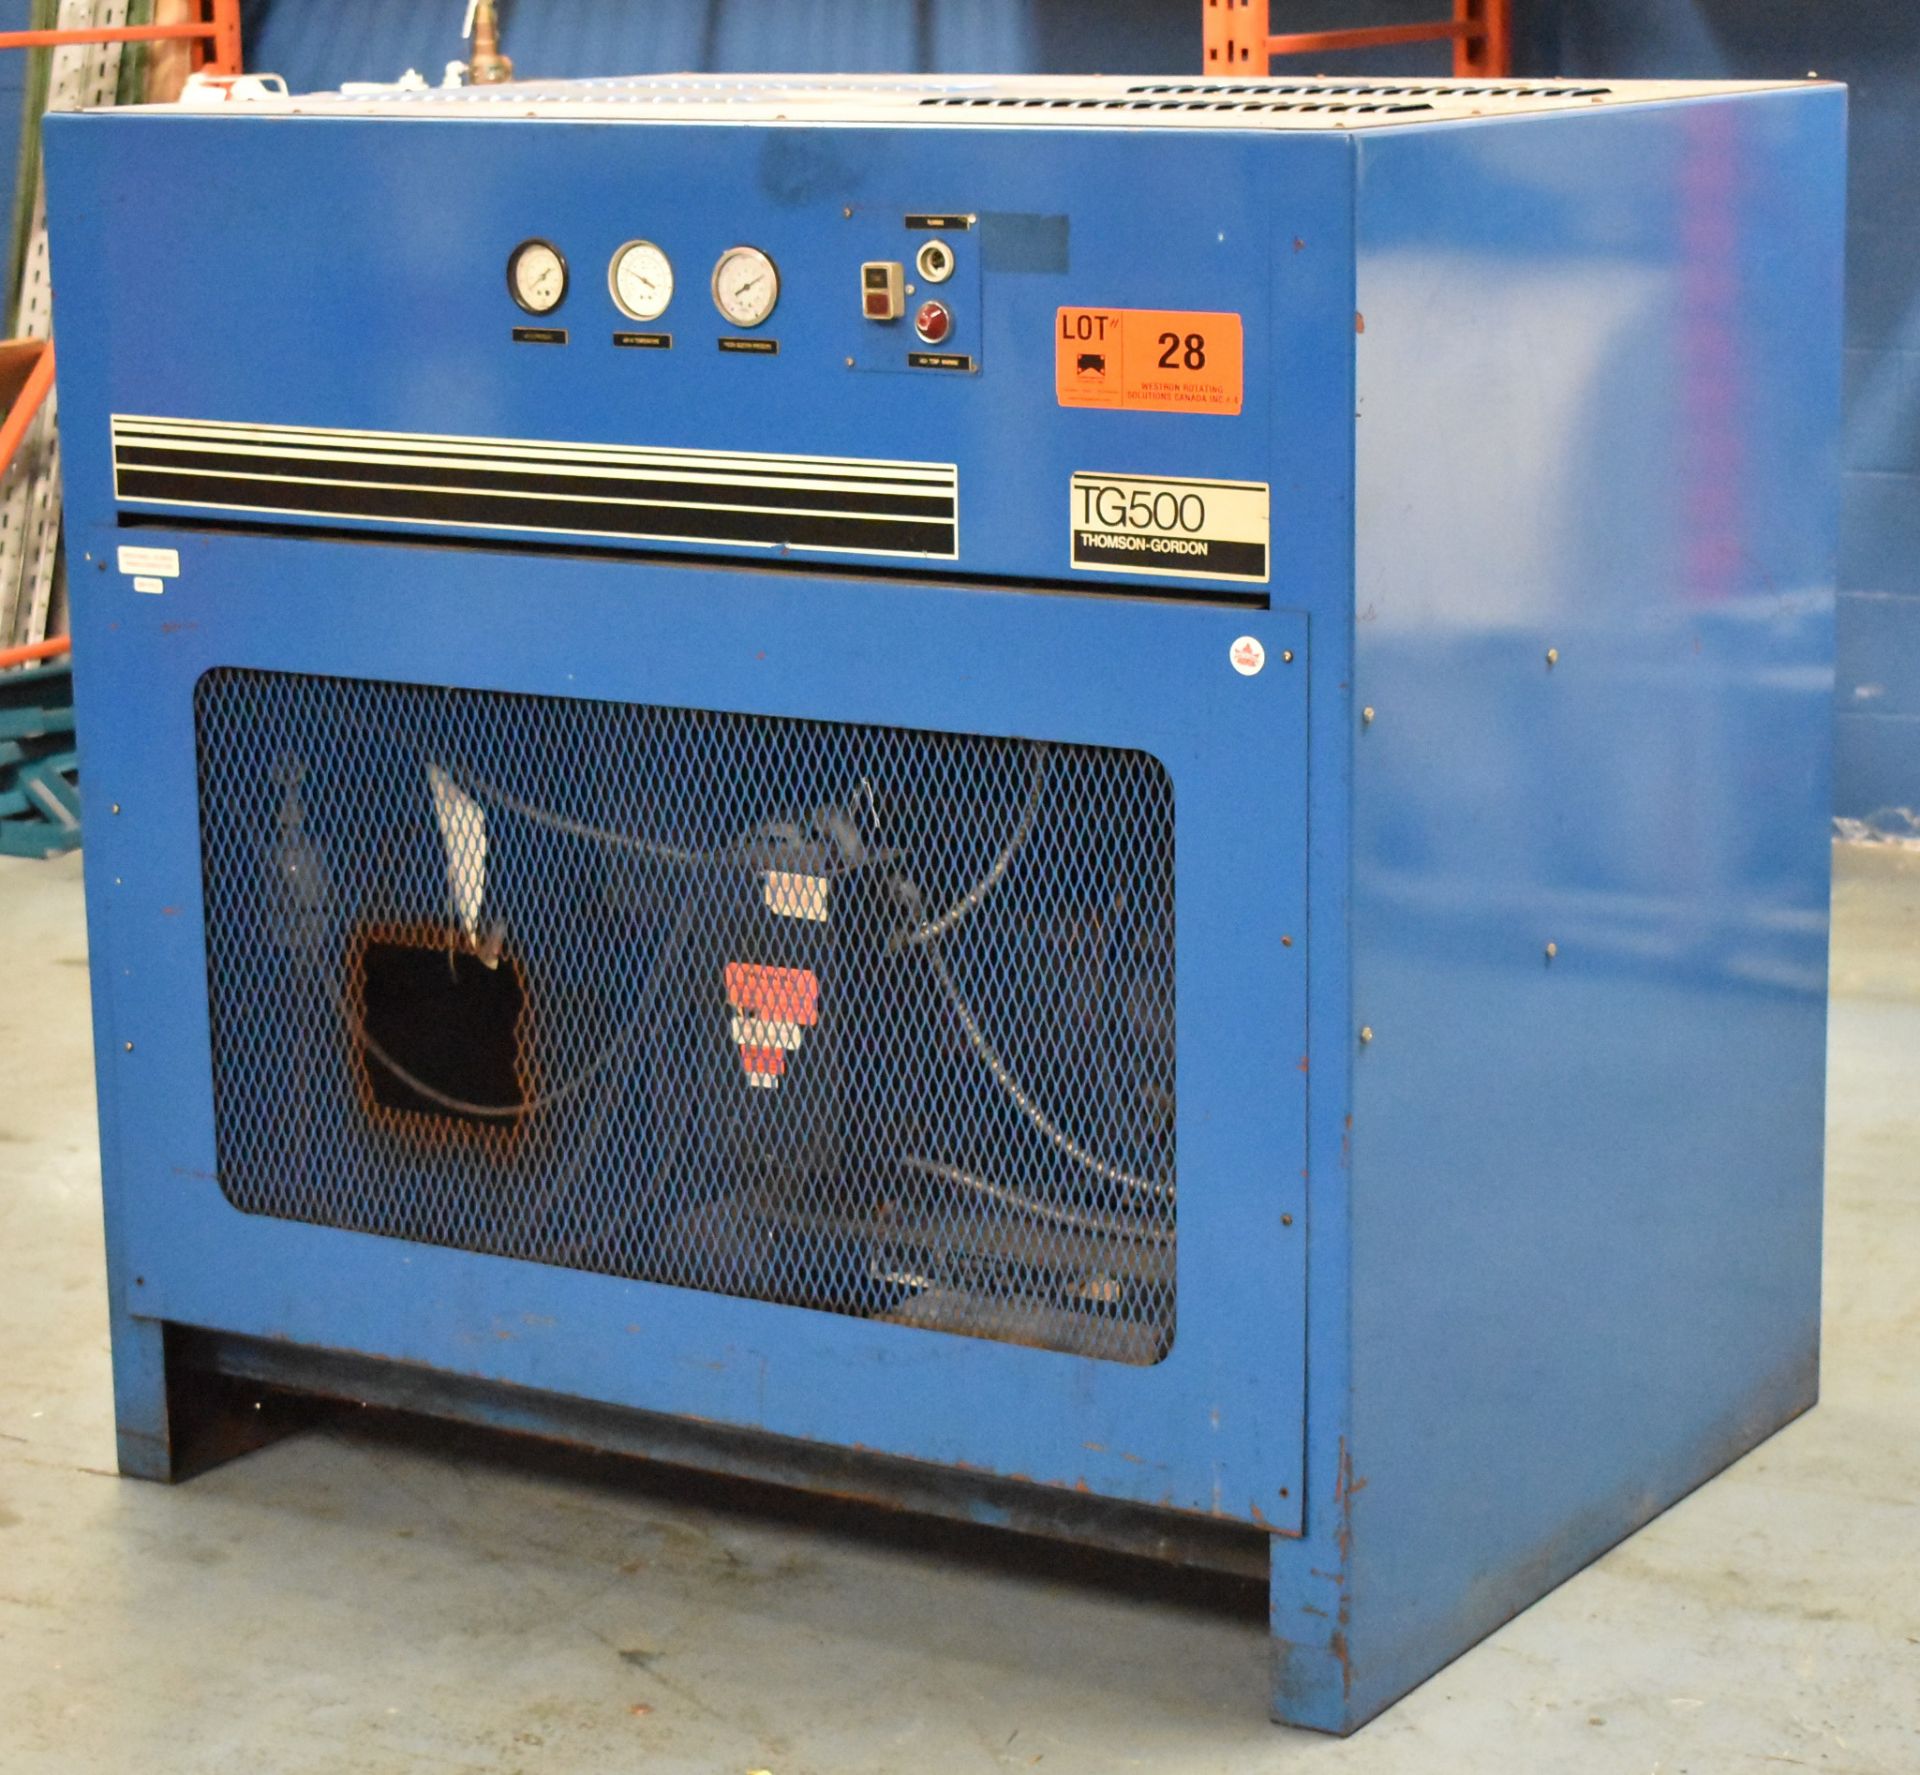 THOMPSON GORDON TG500 REFRIGERATED AIR DRYER, S/N: 86G343 (CI) [RIGGING FEES FOR LOT #28 - $50 CAD